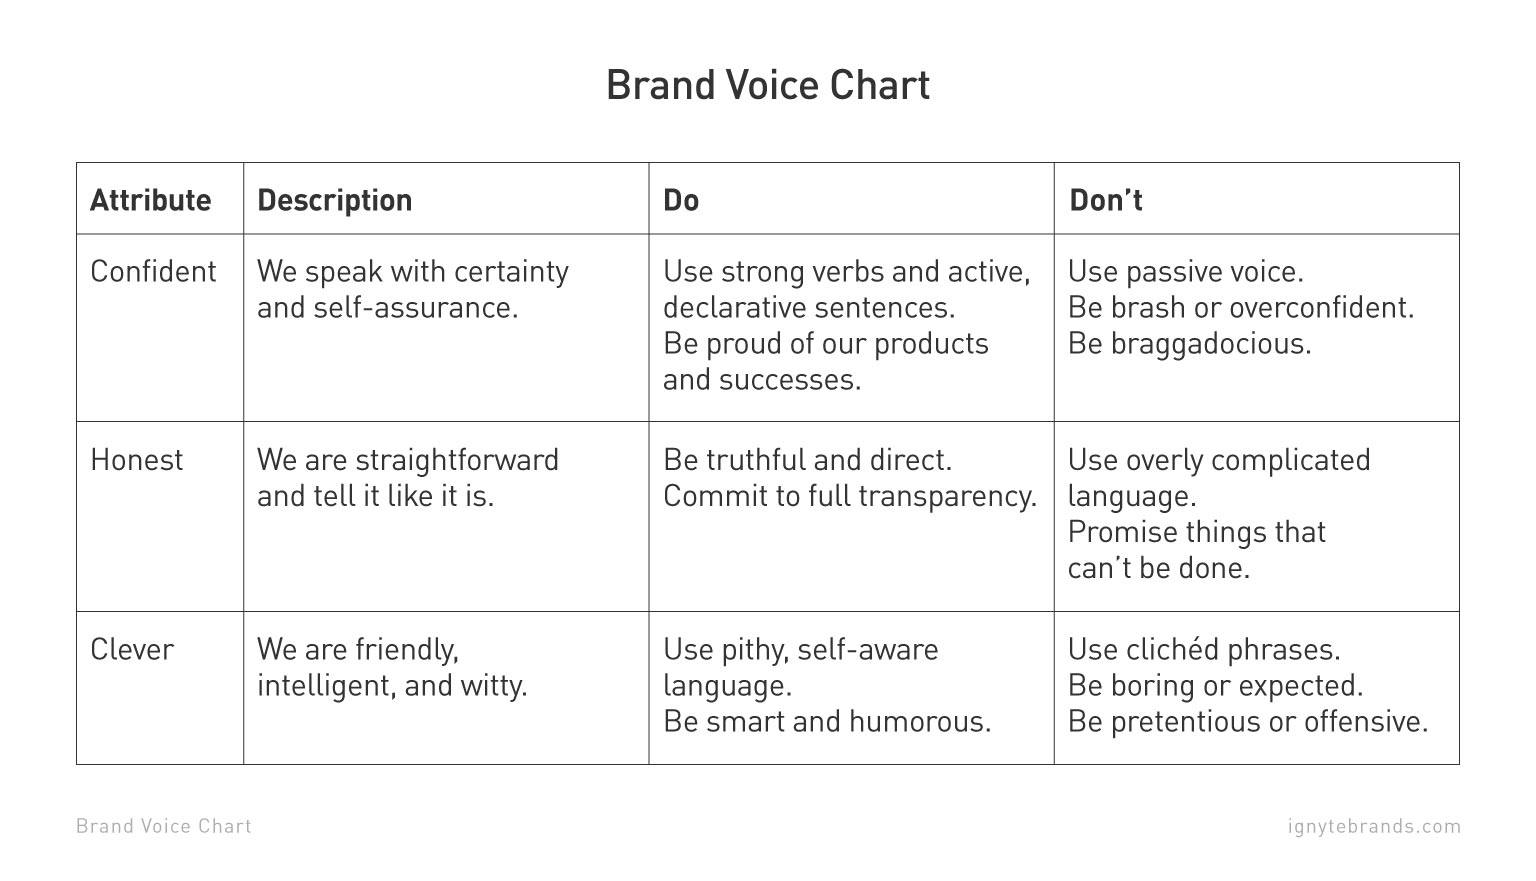 An example of a brand voice chart